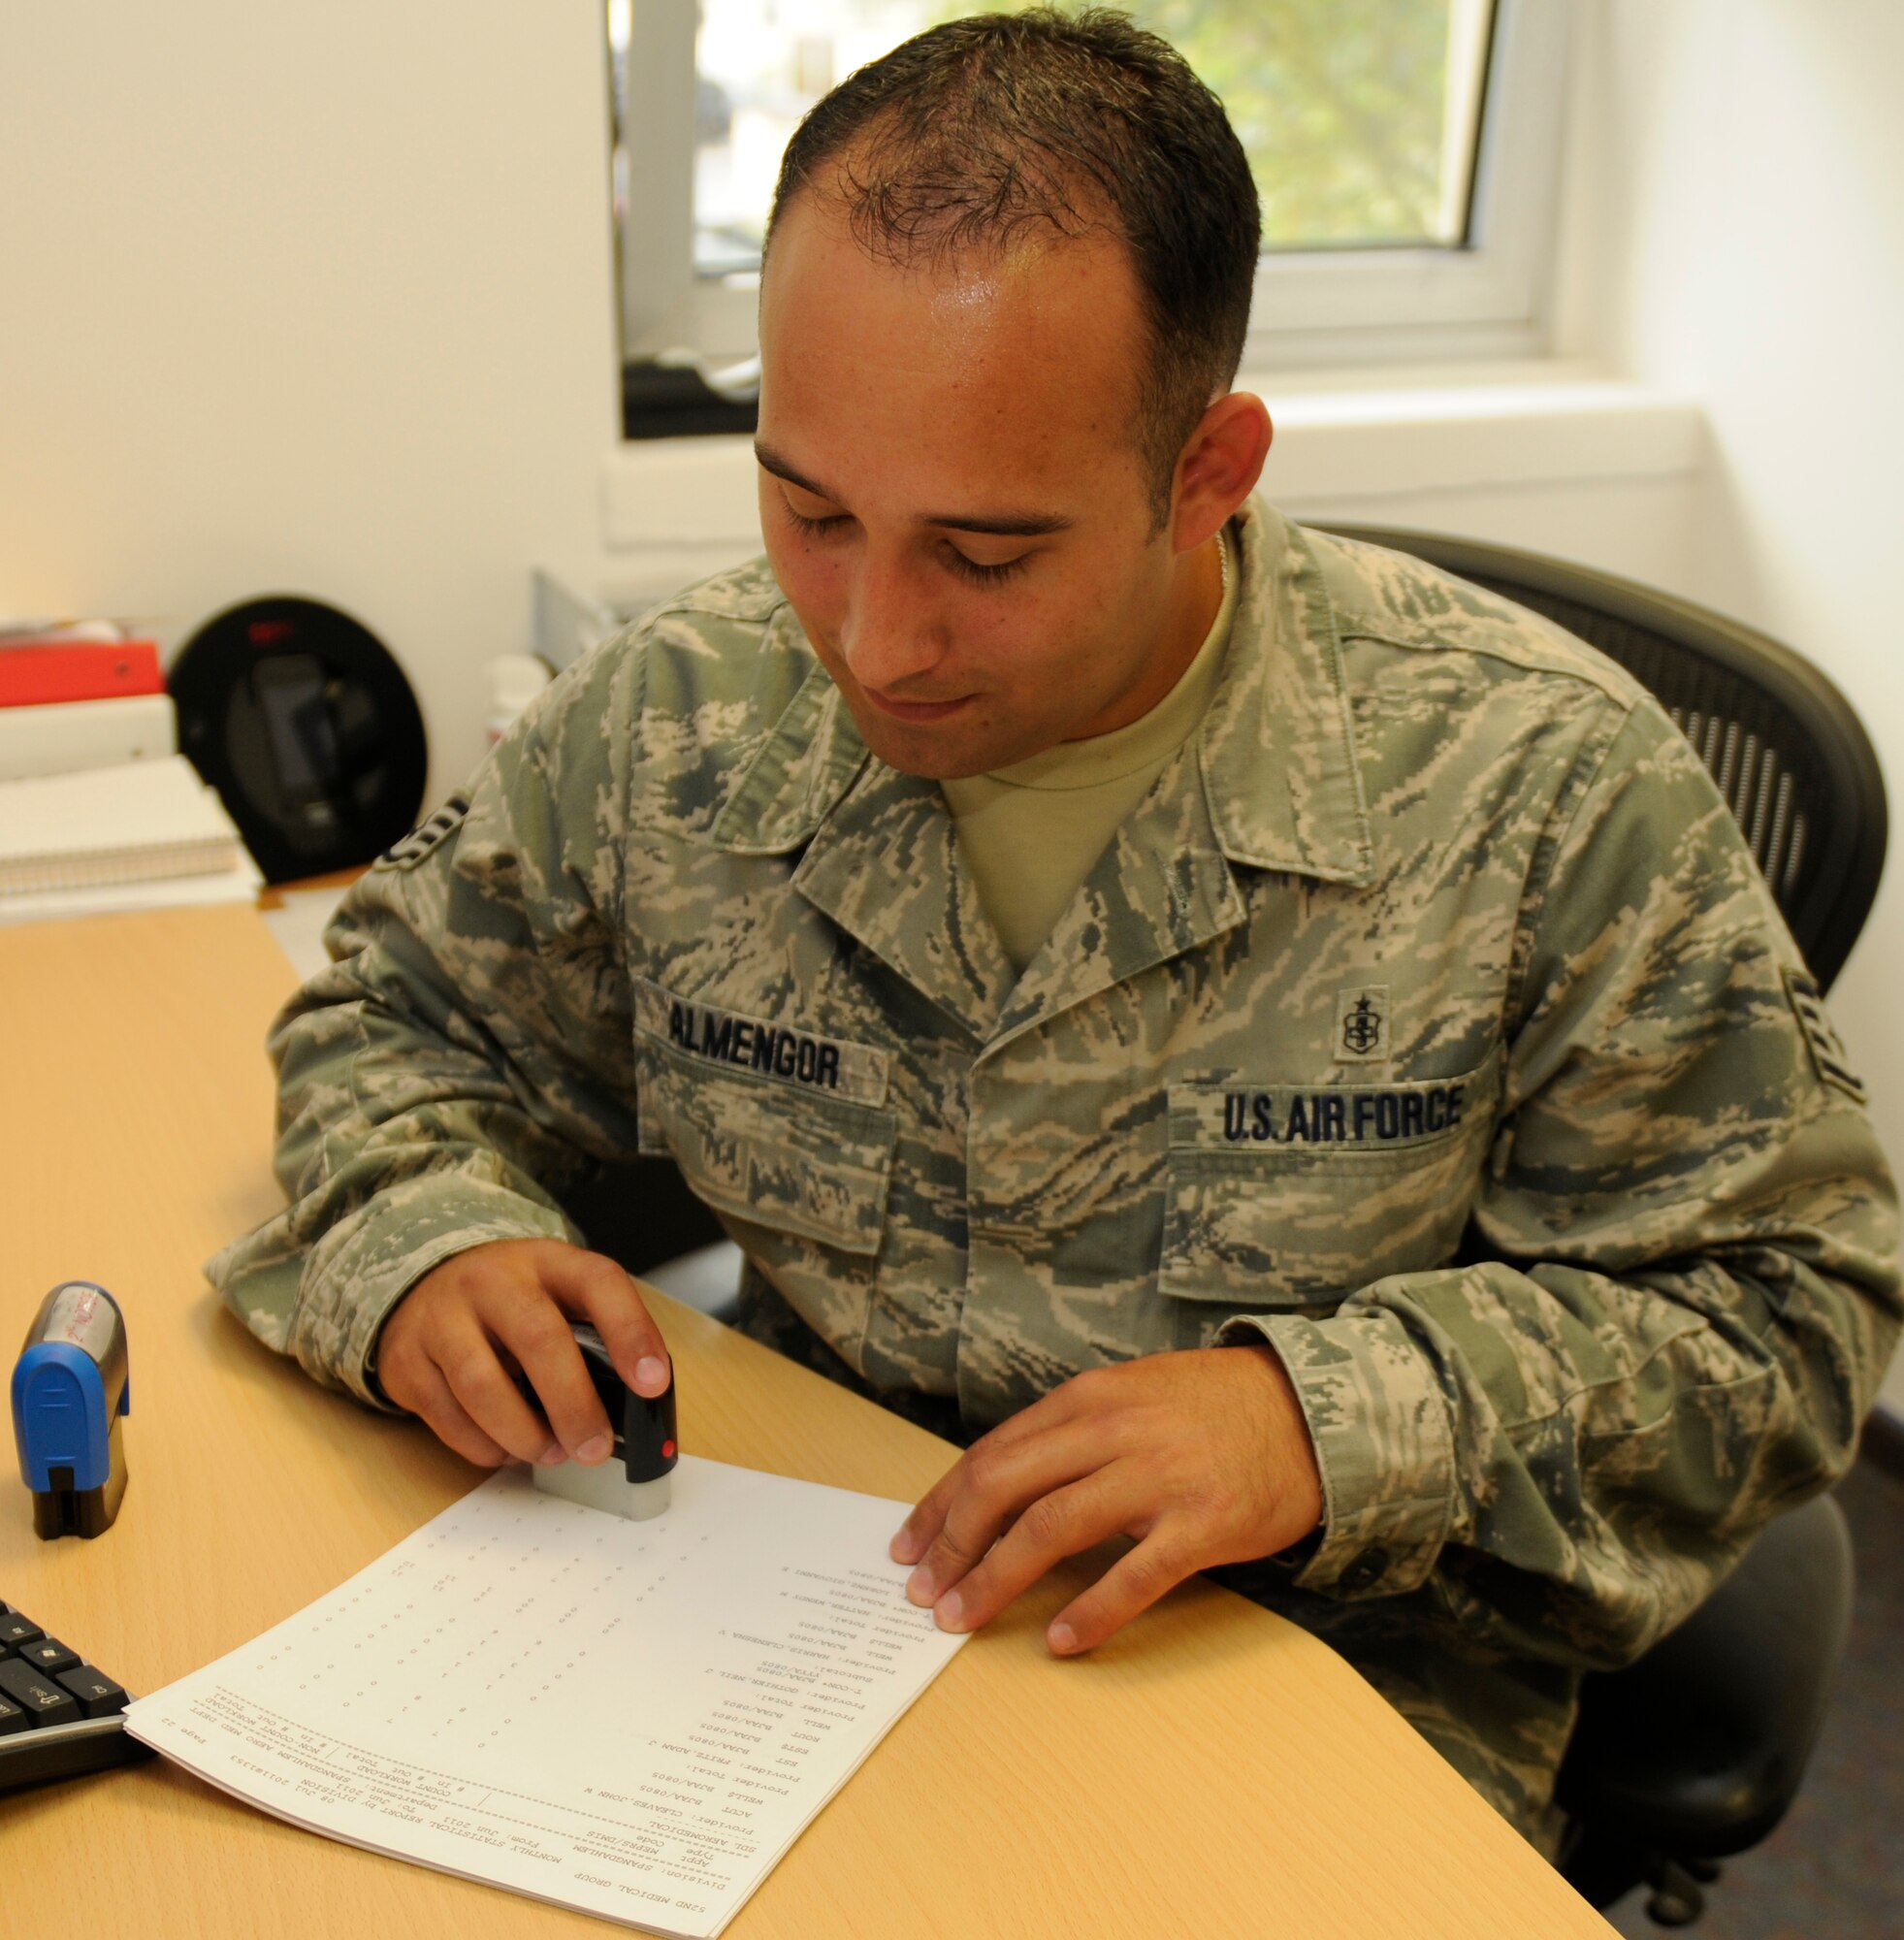 SPANGDAHLEM AIR BASE, Germany –Staff Sgt. Edgar Almengor, 52nd Medical Support Squadron NCO in charge of medical service account, is the Super Saber Performer for the week of August 1-5.